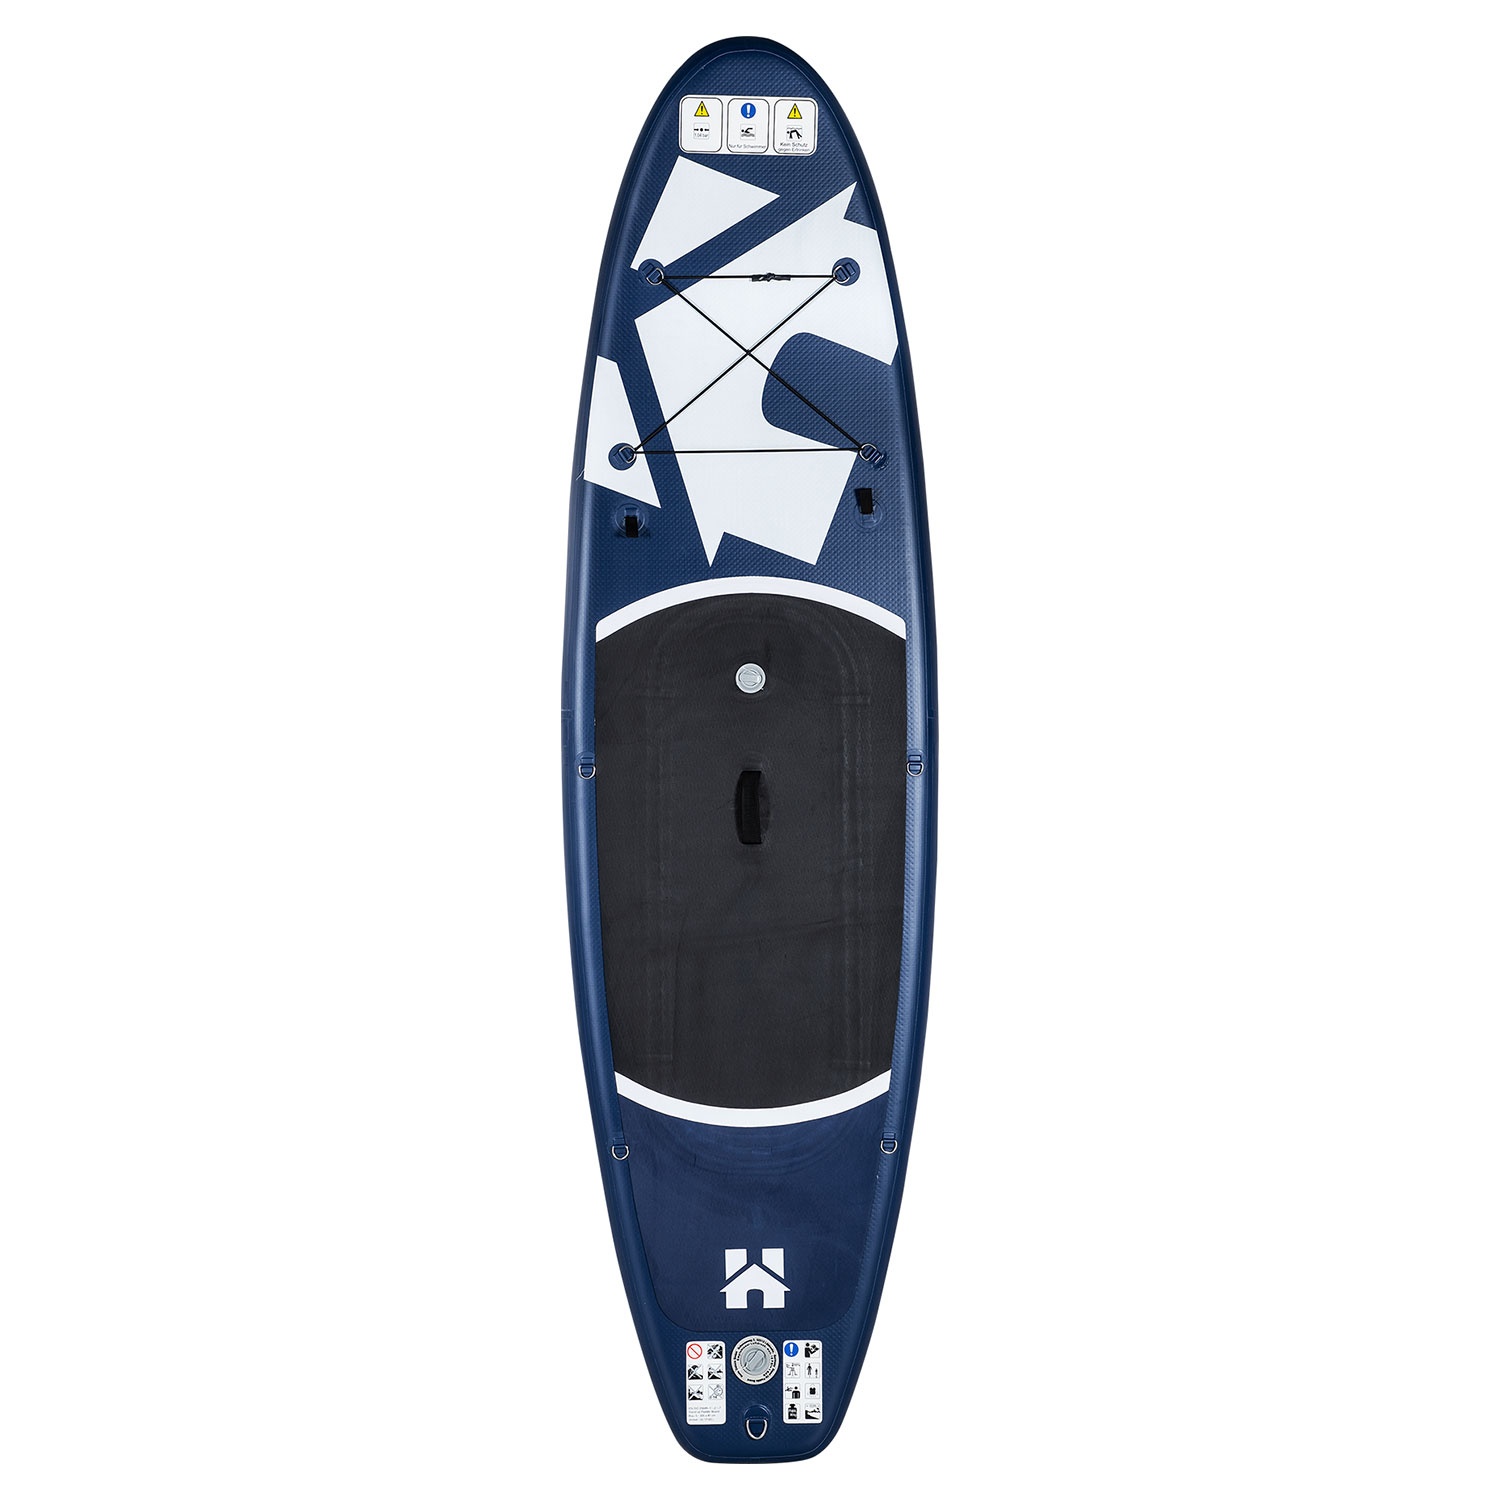 HOME DELUXE Stand-up-Paddle- Board Moana, 320 cm – Blau